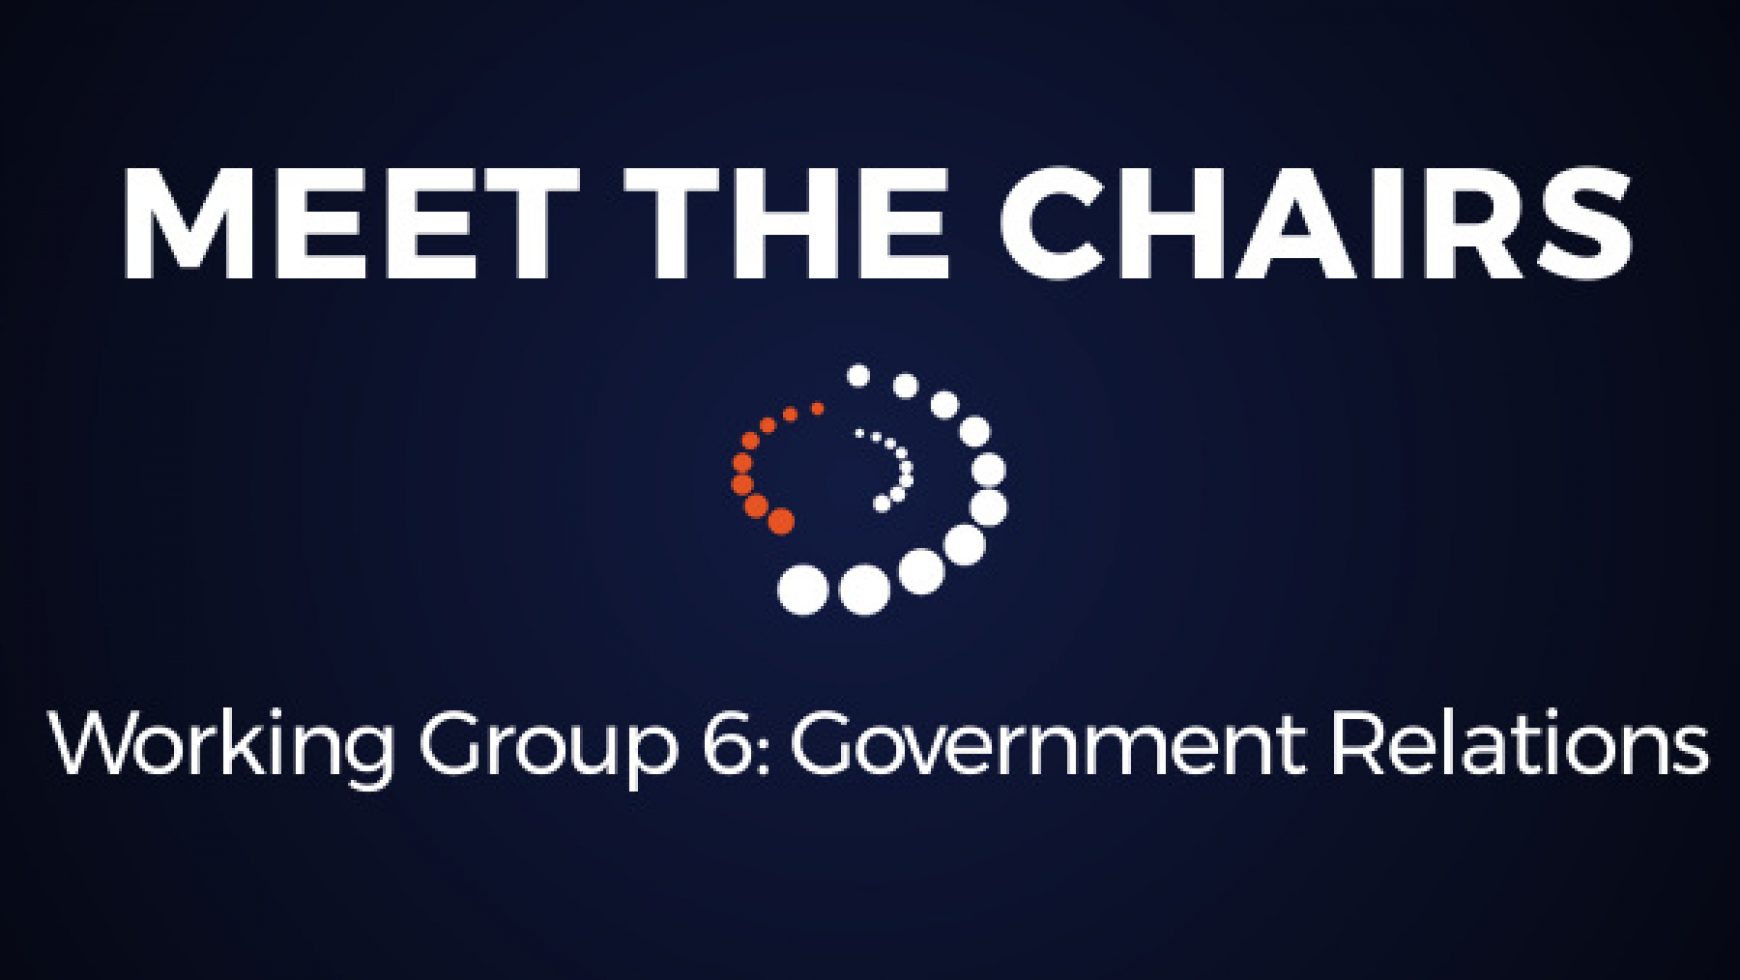 Meet the Chairs: Government Relations Working Group